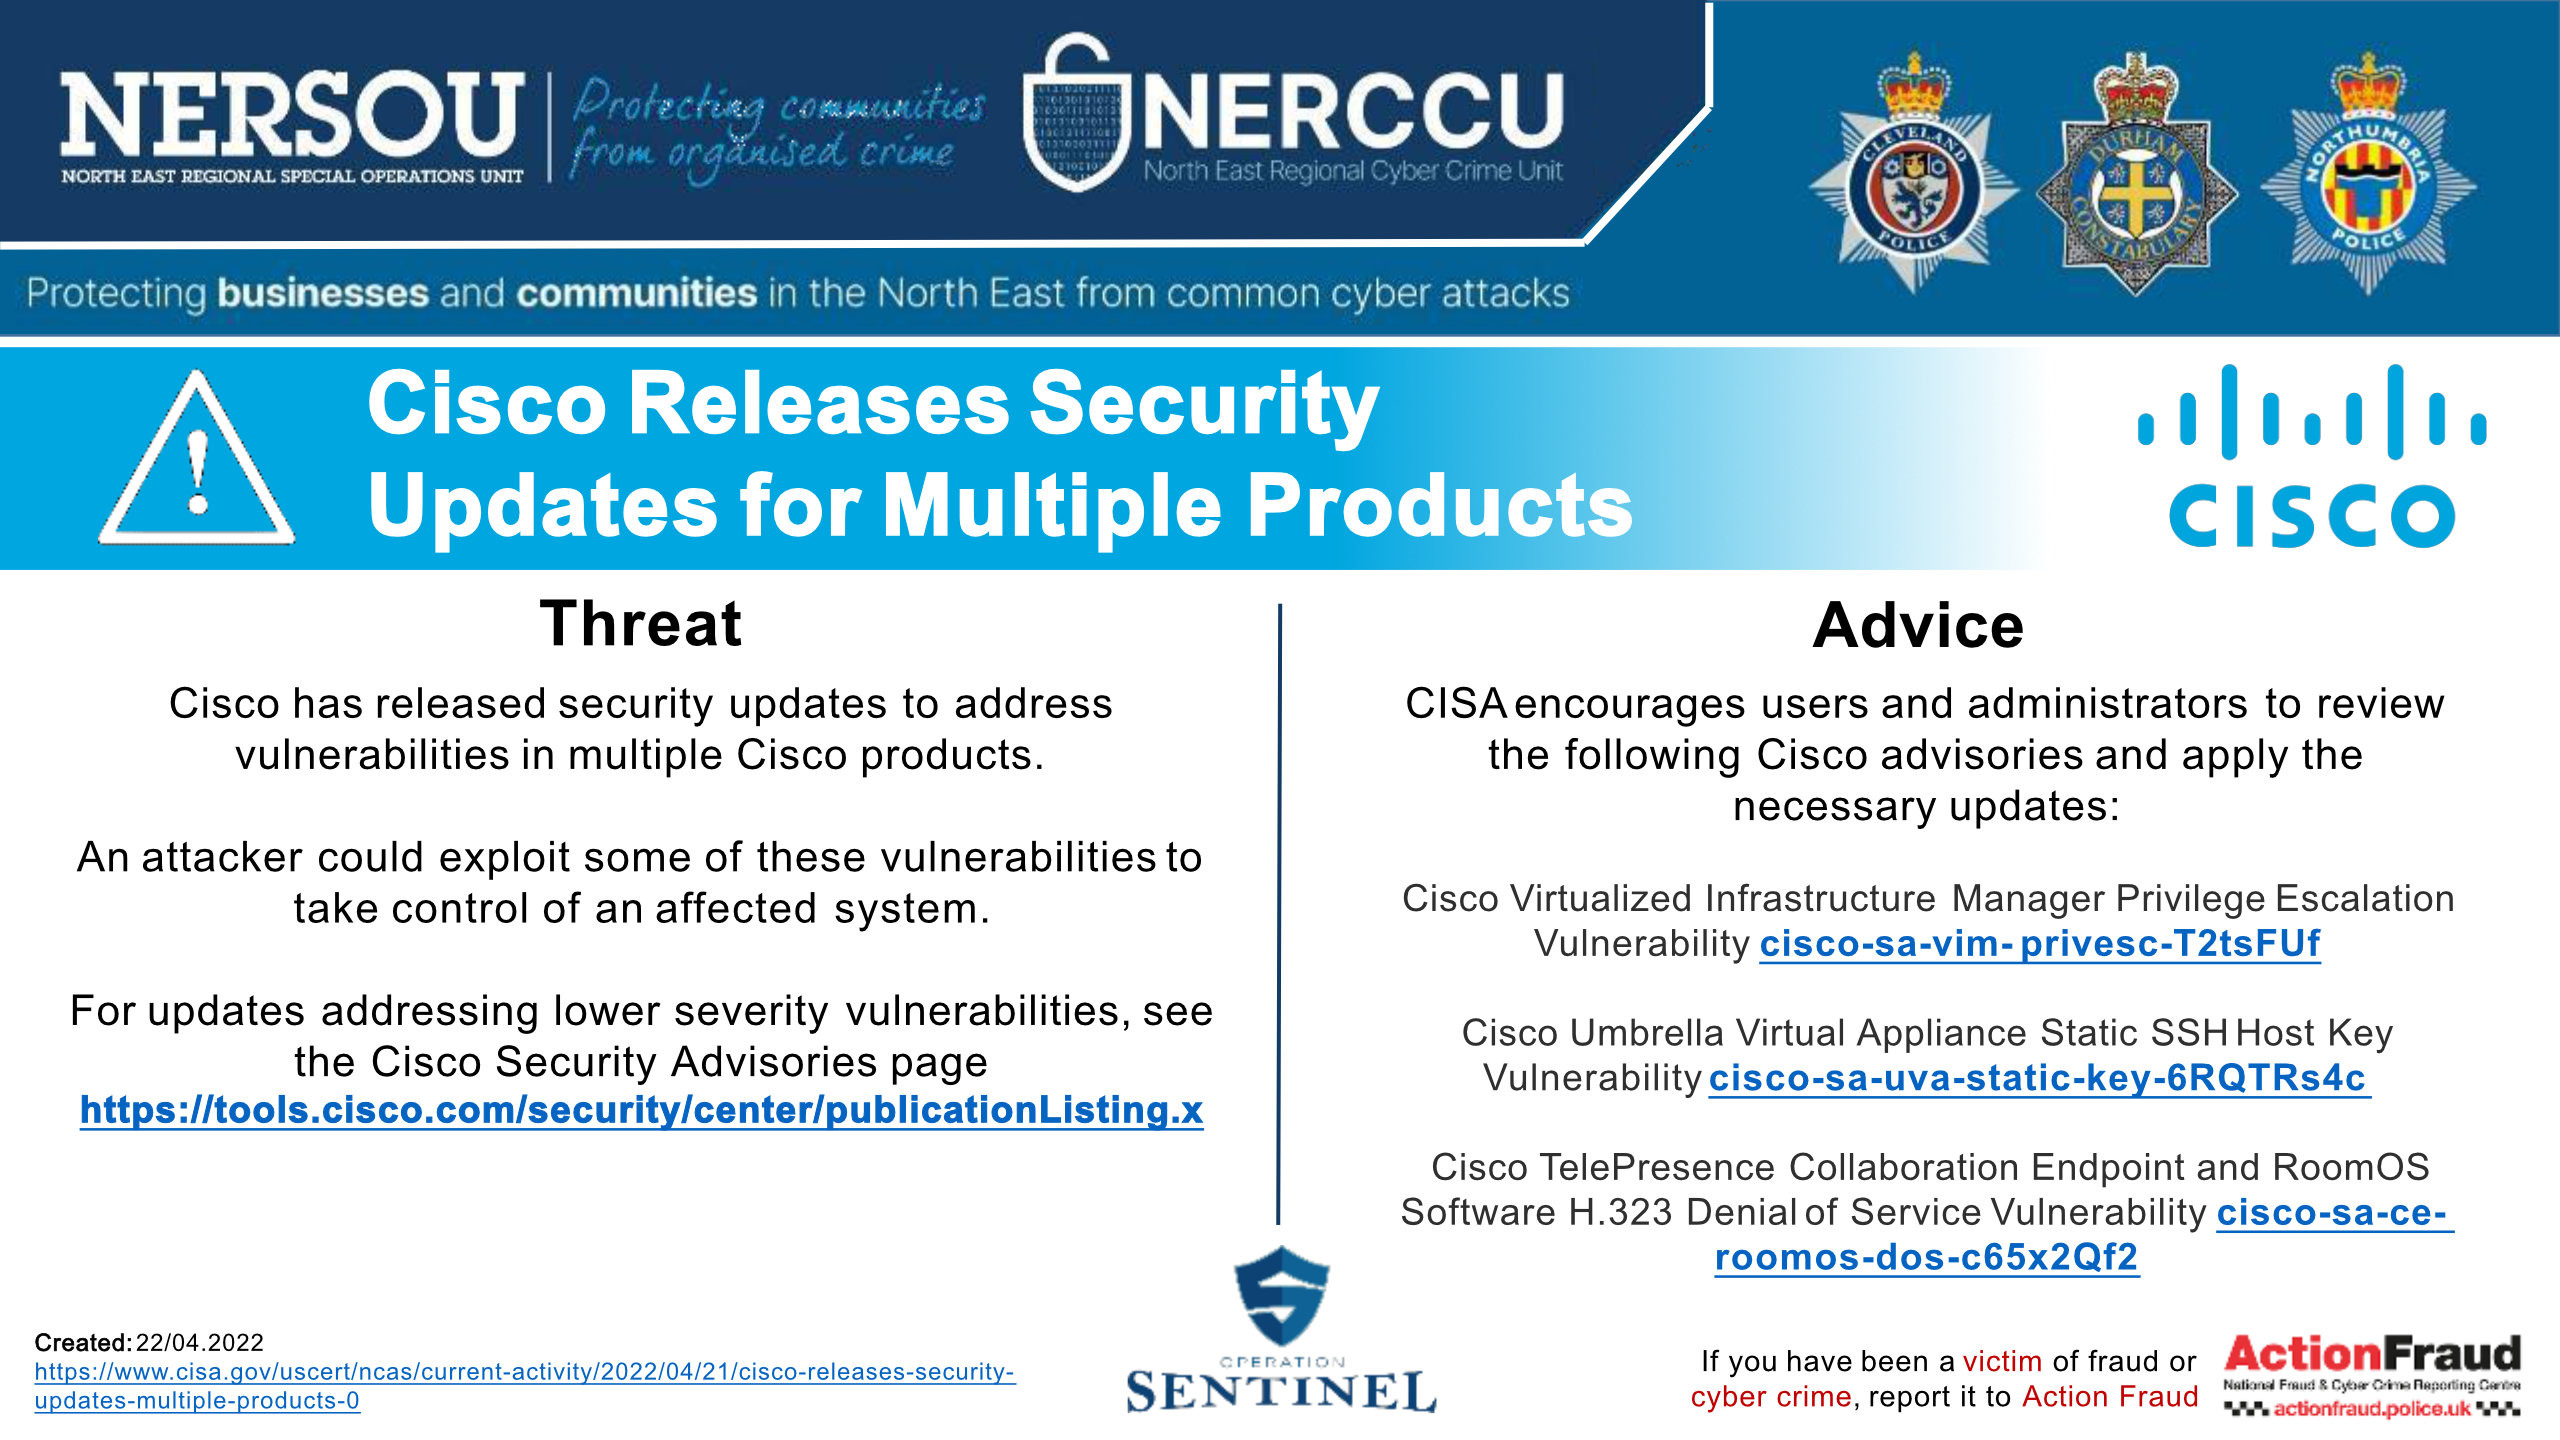 Notification 20220222 Cisco Releases Security Updates For Multiple Products